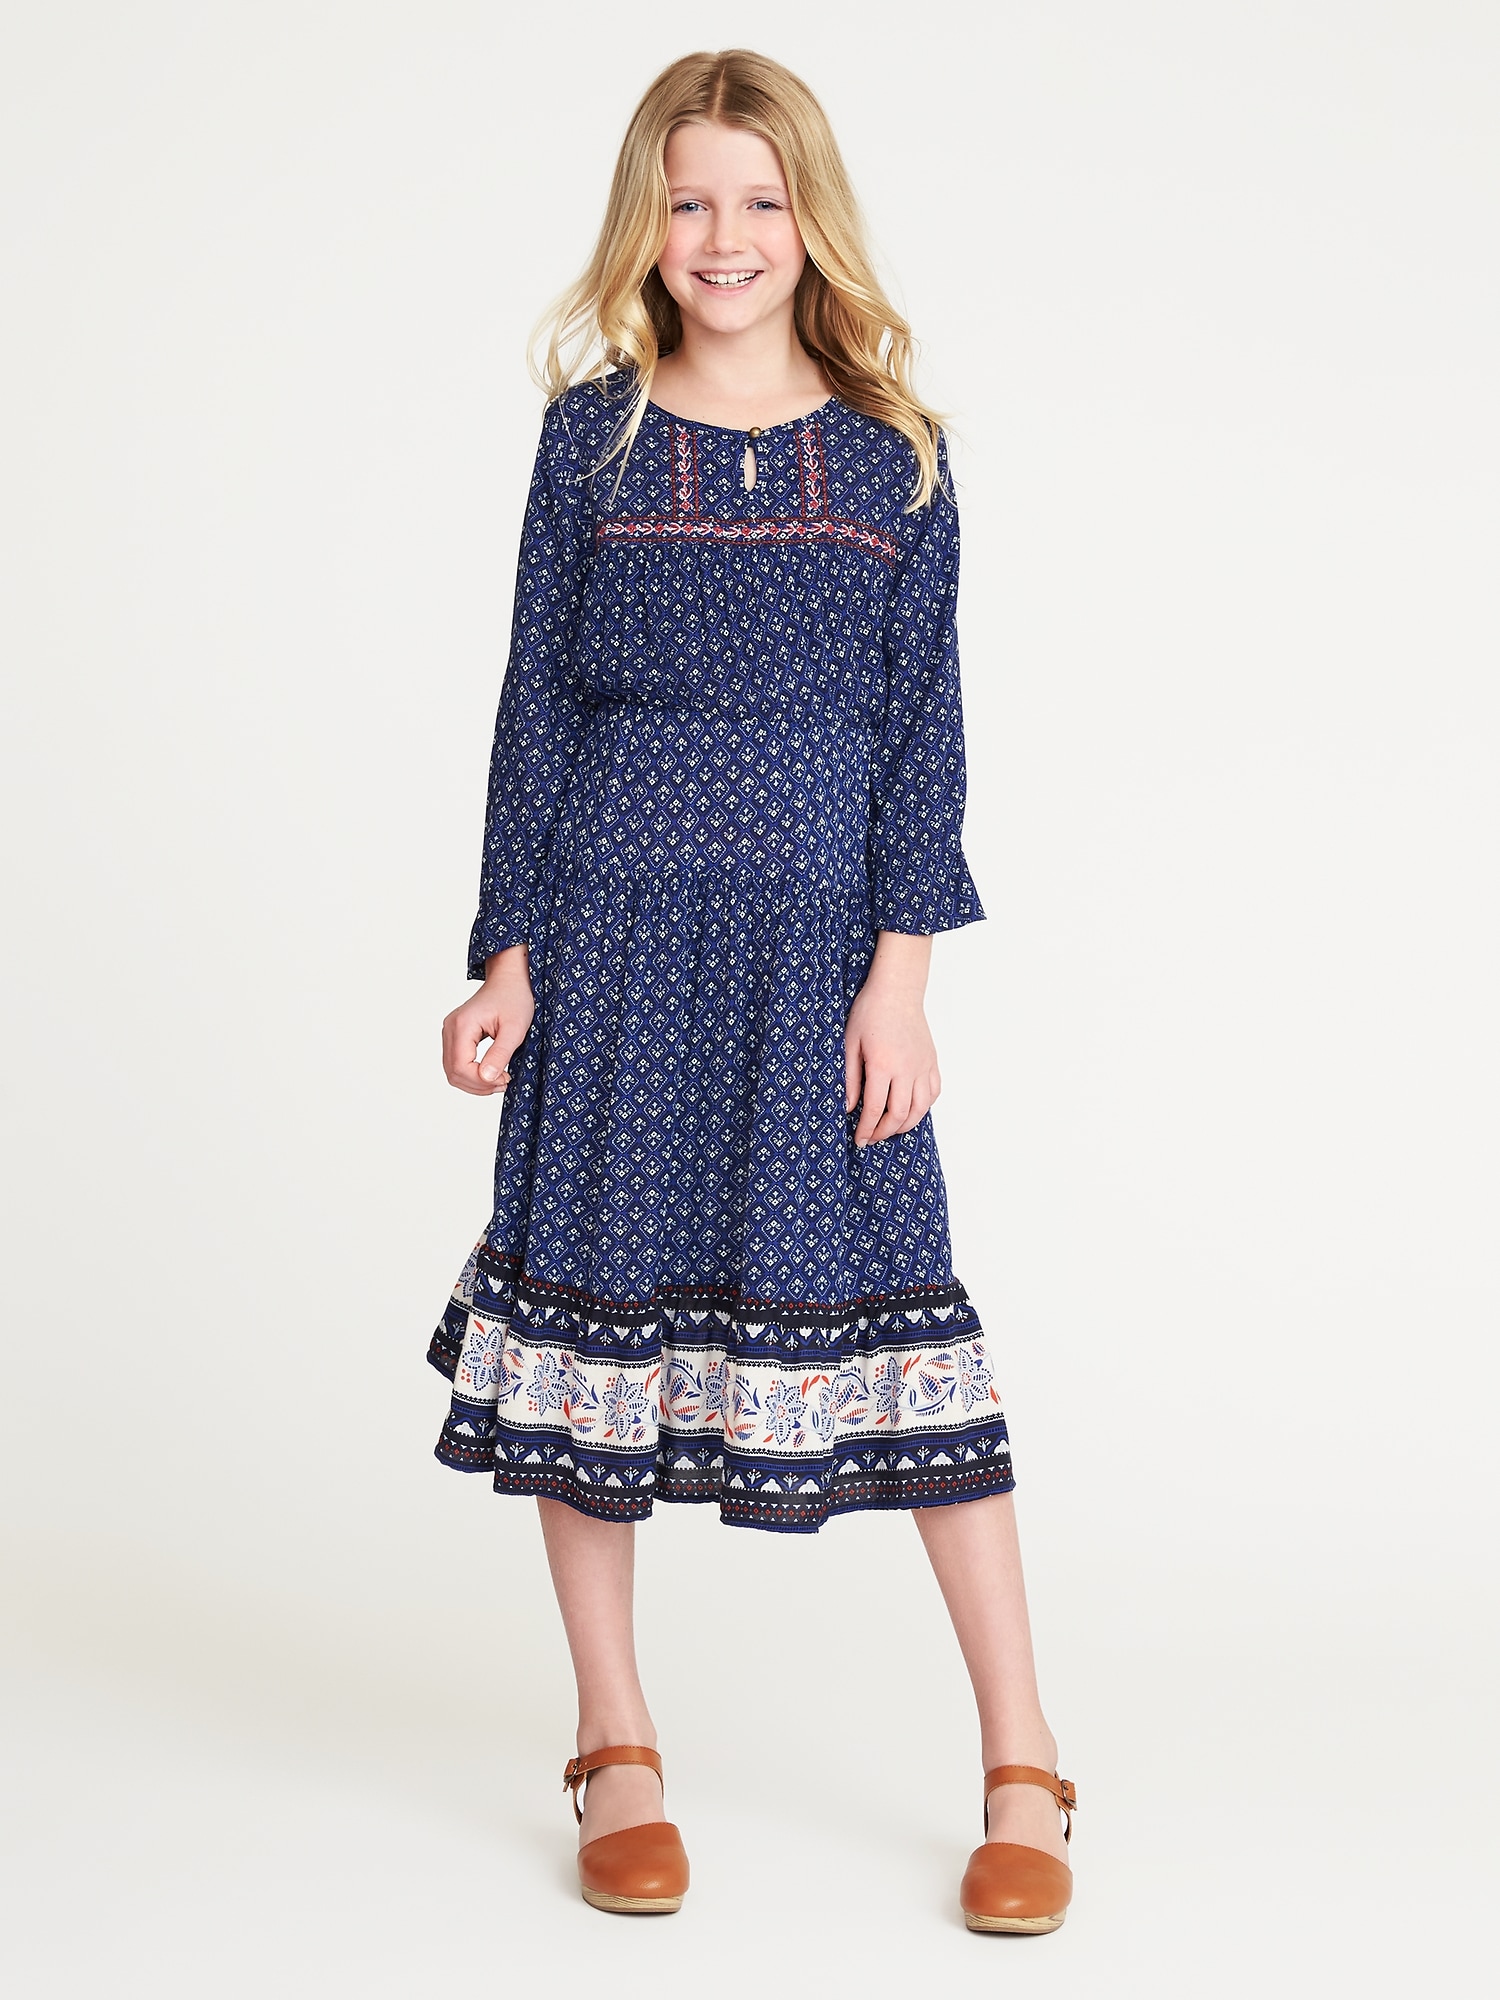 Tiered Border-Print Dress for Girls | Old Navy